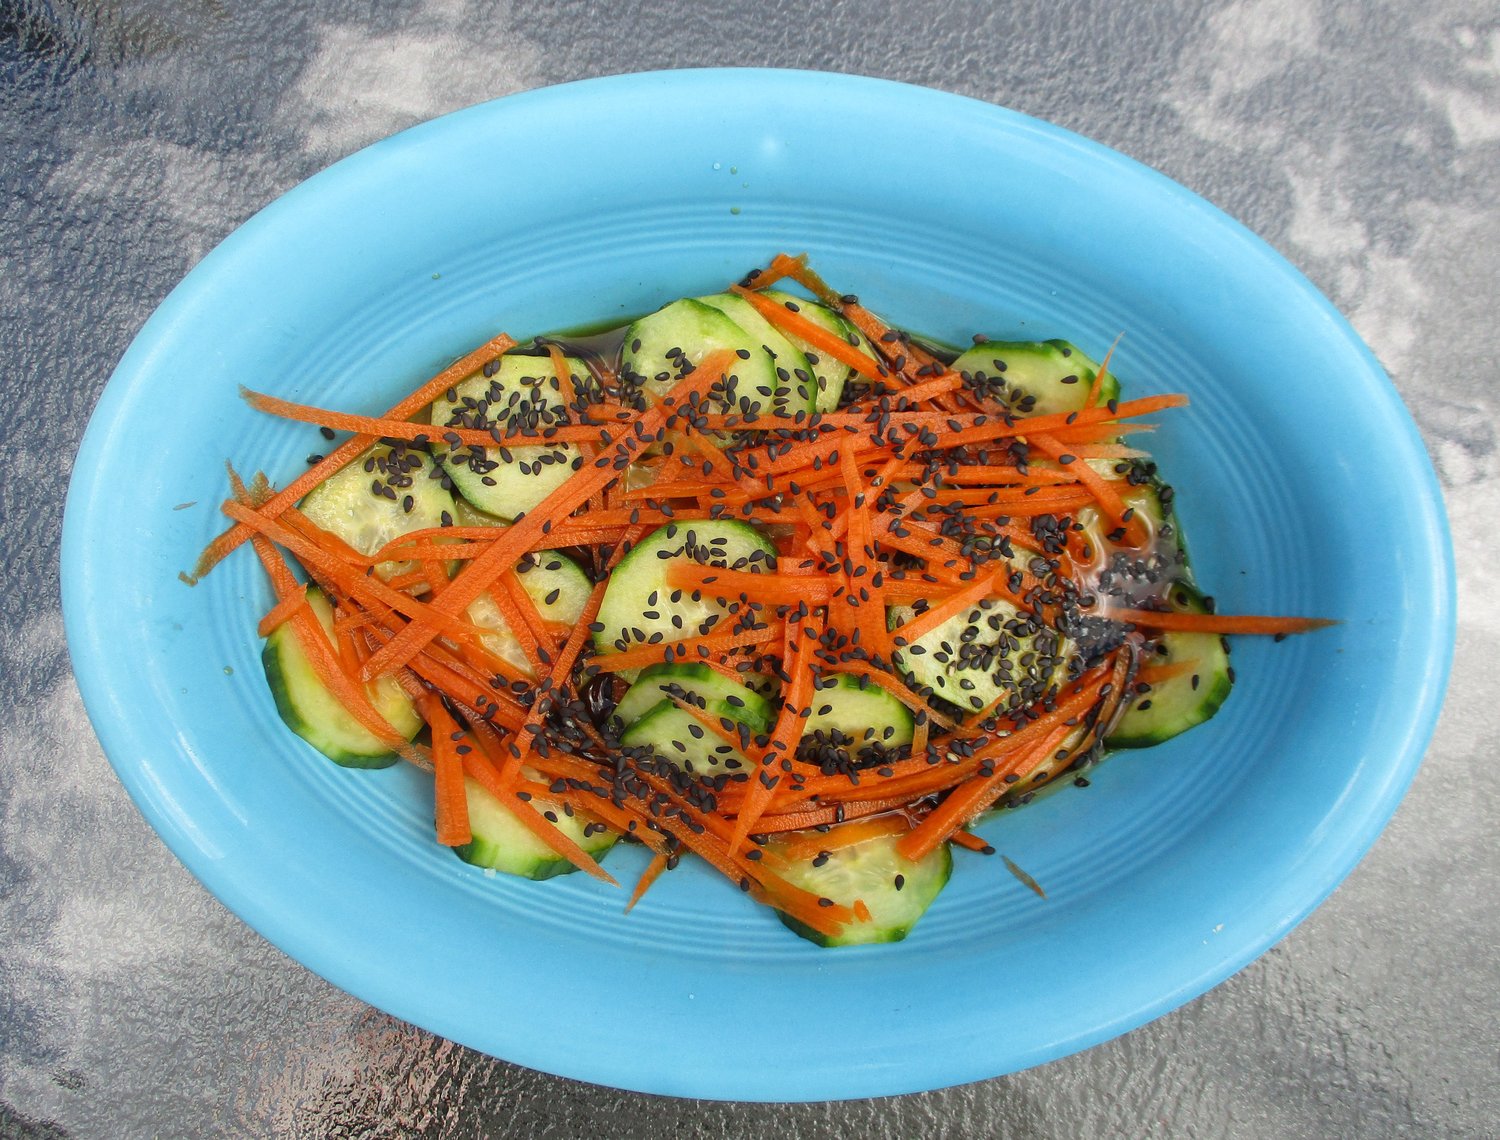 Japanese cucumber and grated carrot sunomono with black sesame seeds.